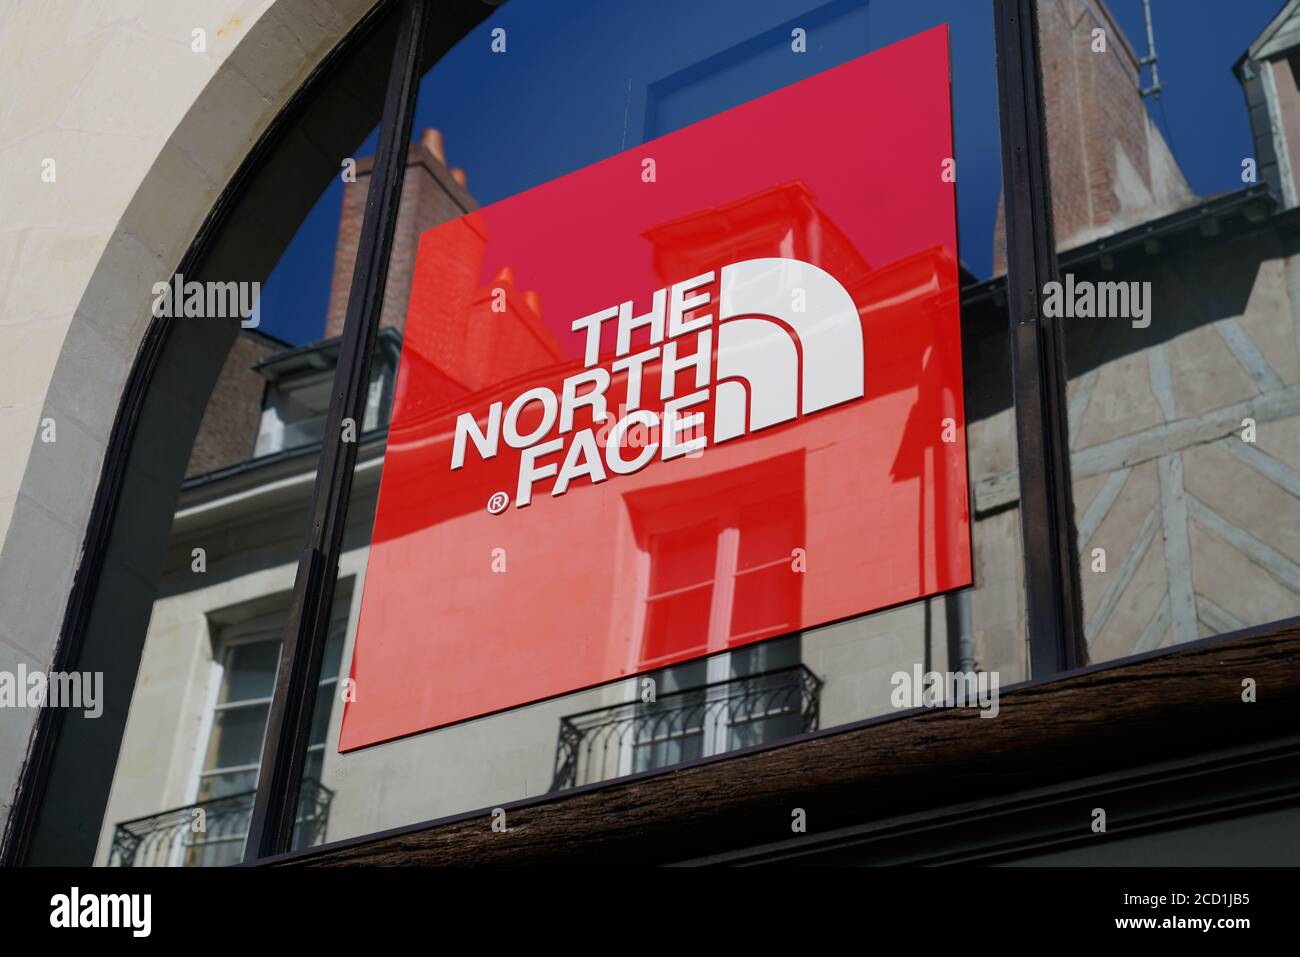 Bordeaux , Aquitaine / France - 08 20 2020 : The North Face store building  exterior with red text sign and logo Stock Photo - Alamy